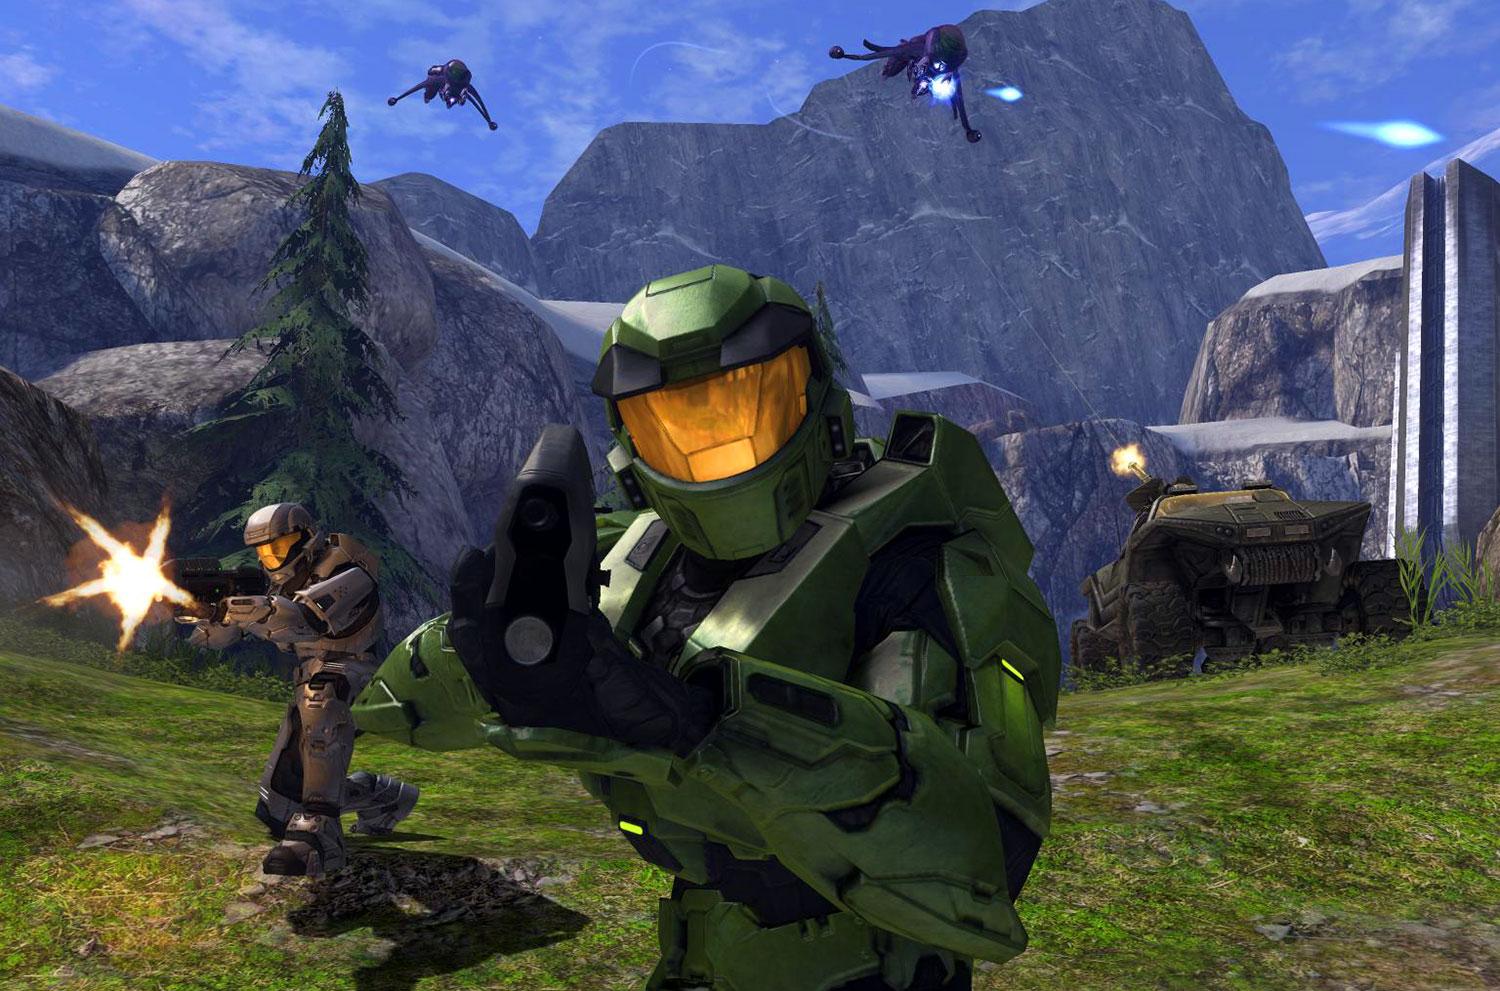 Halo Infinite Season 1 Titled “Heroes of Reach,” MP Character Story Content  May be Coming